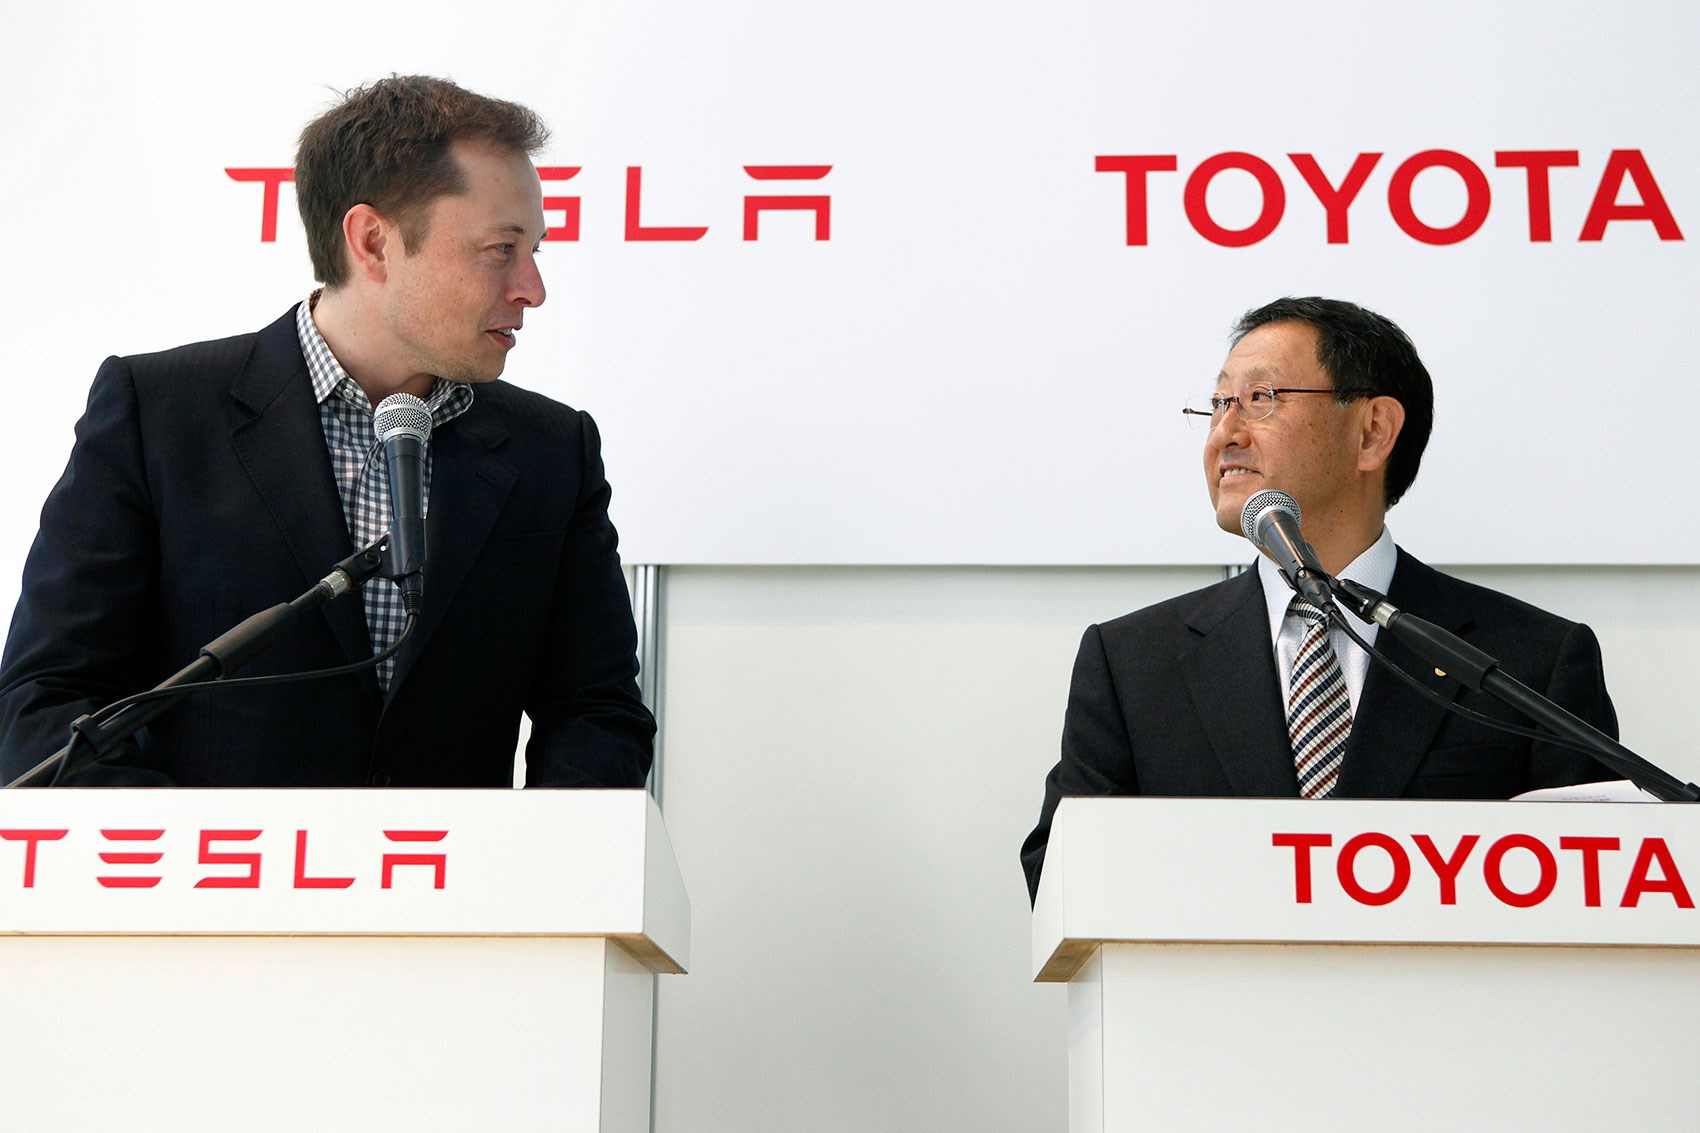 Tesla beats Toyota to become the world’s most valuable automaker